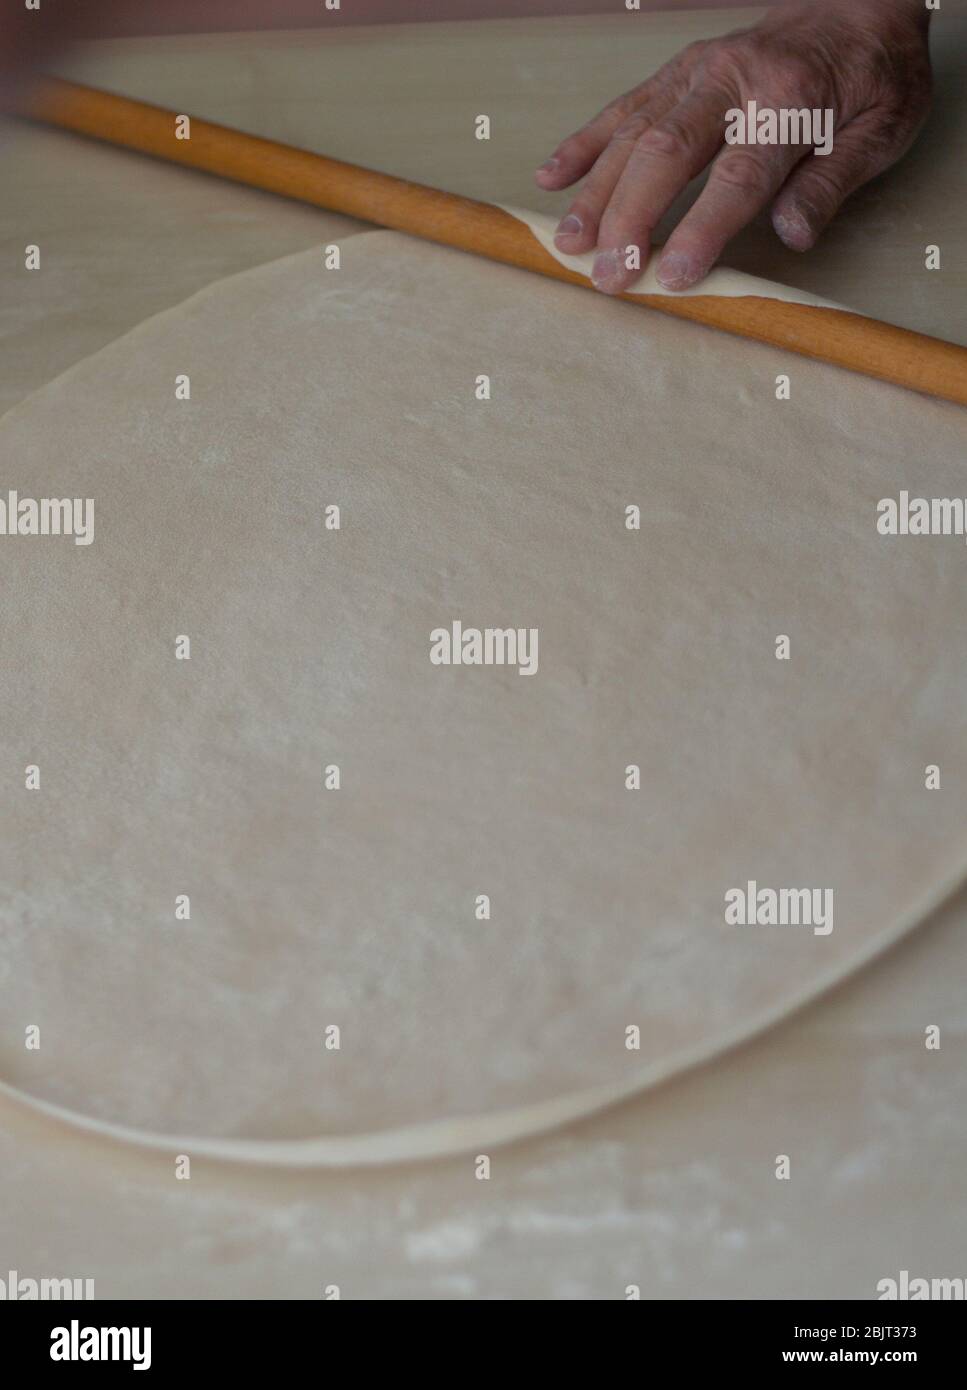 Hands baking dough with rolling pin on wooden table for turkish food manti. Manti is a type of dumpling popular in most Turkic cuisines Stock Photo